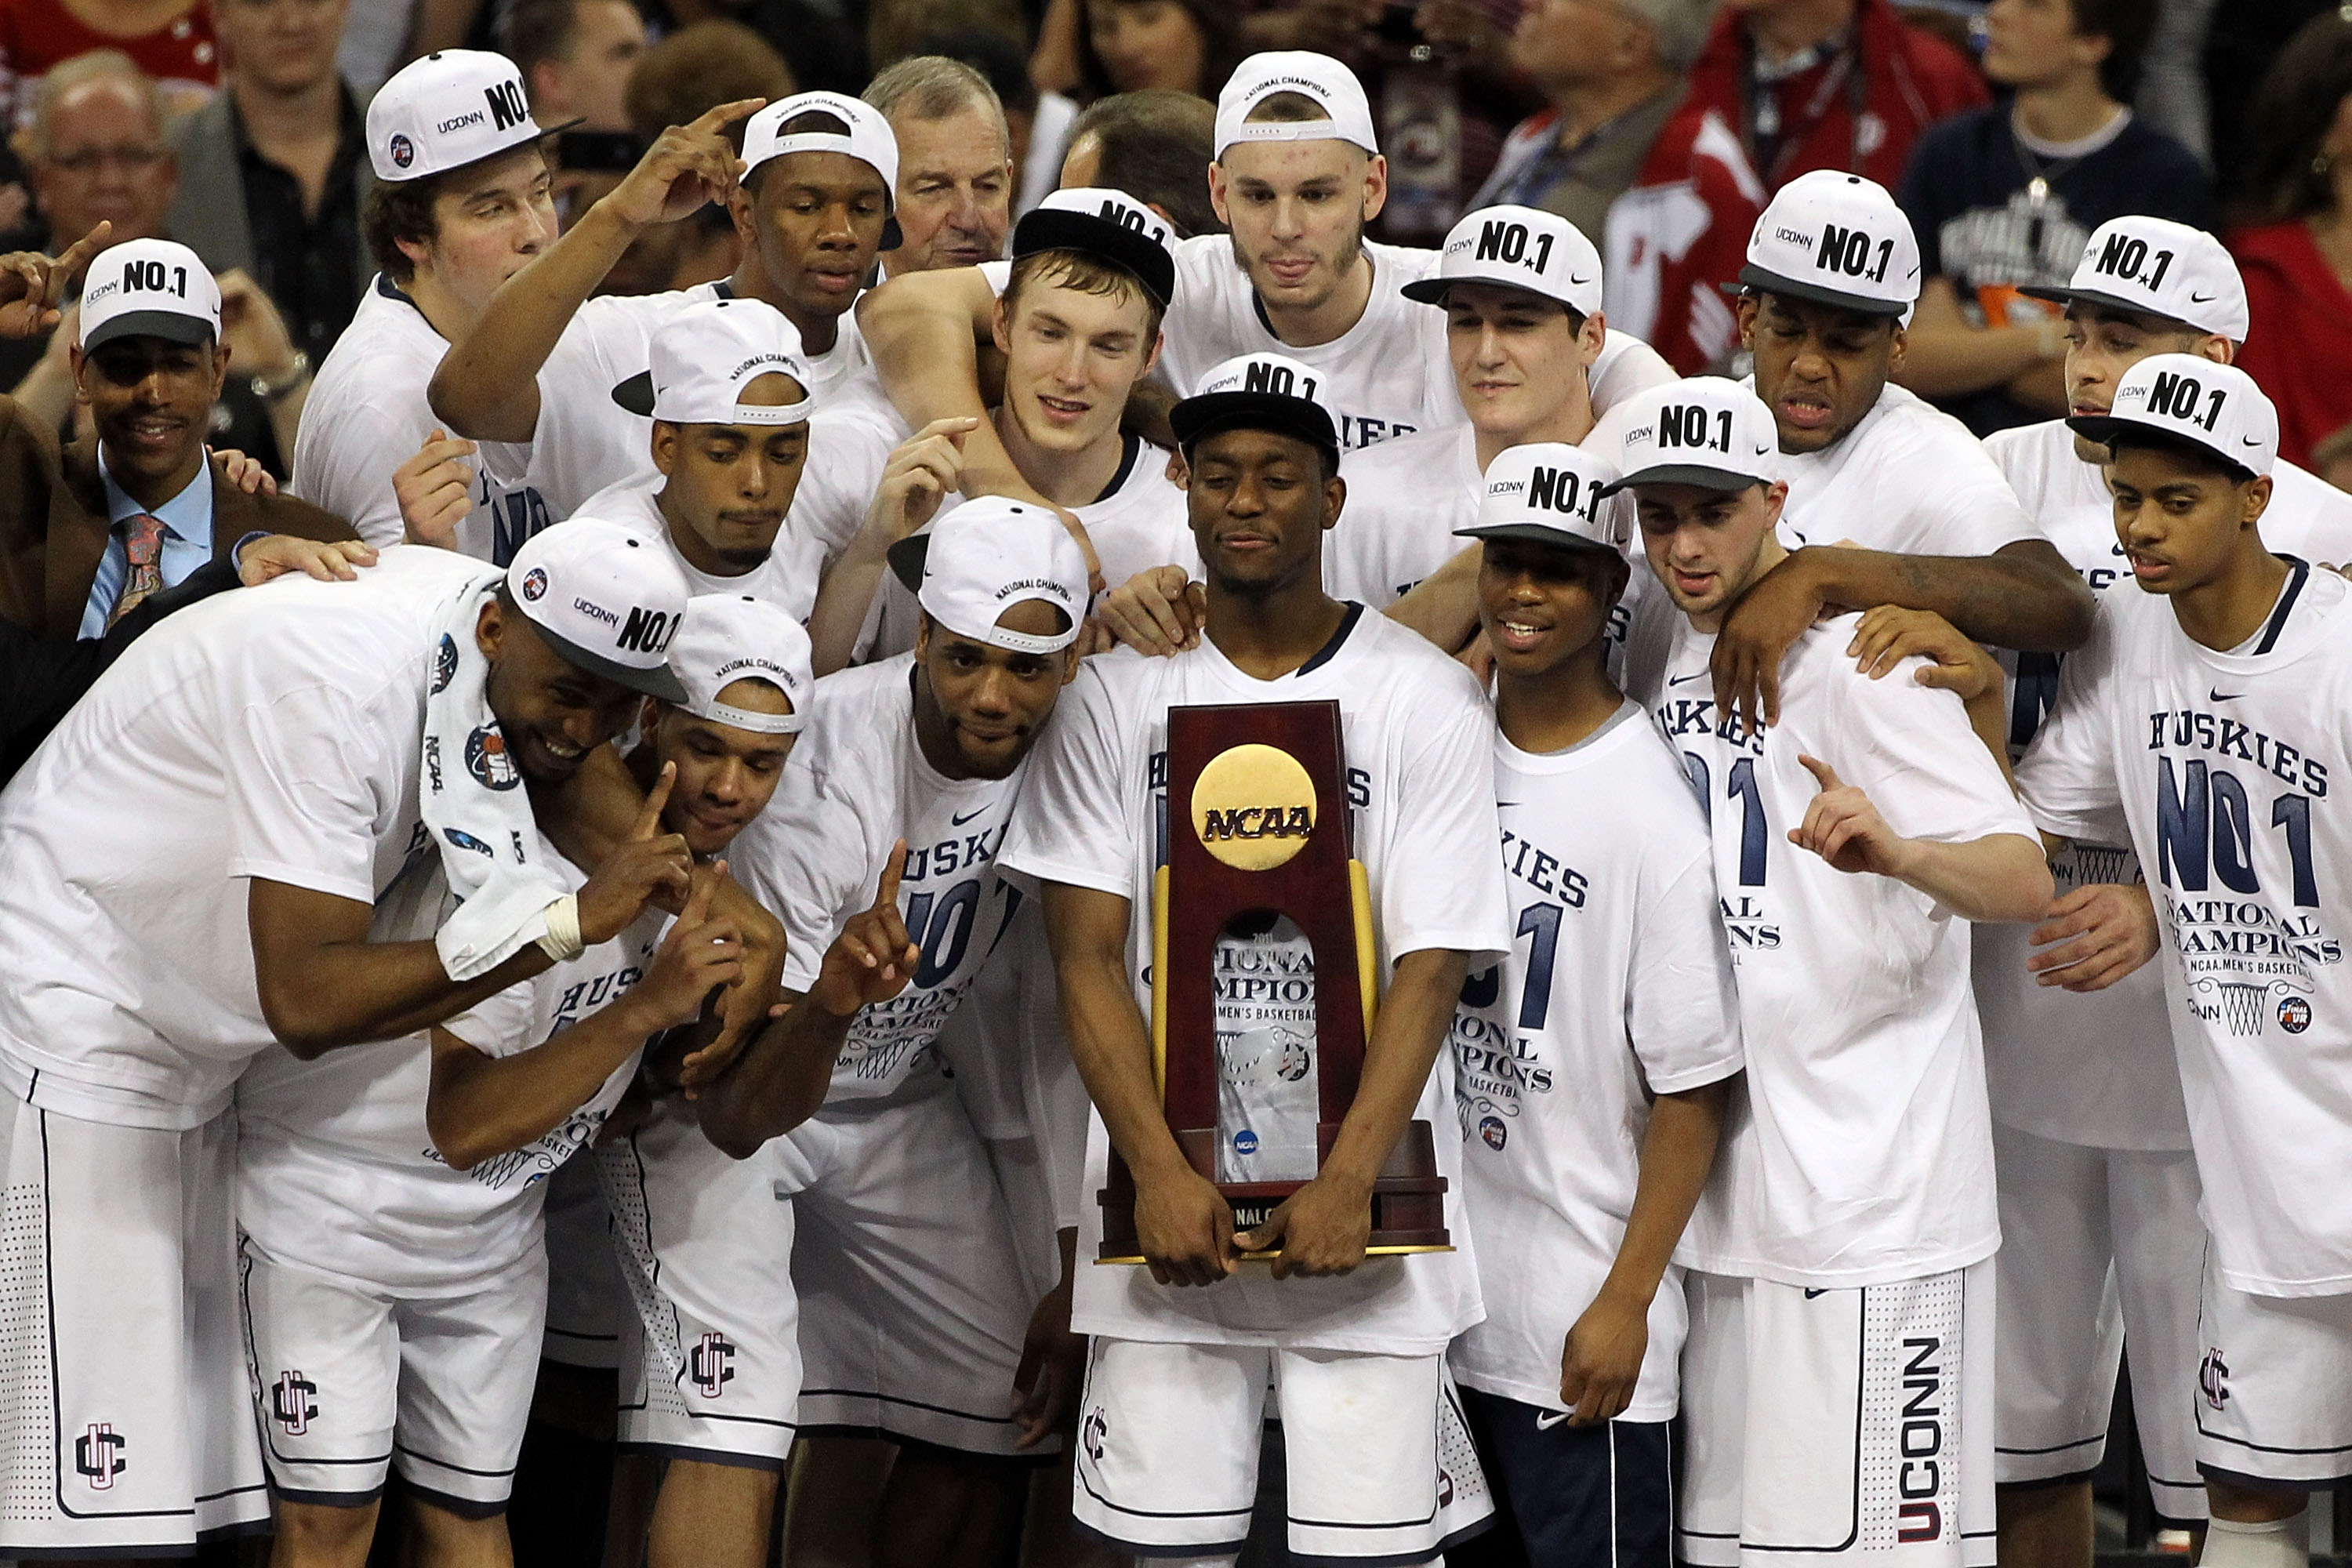 UConn spoils another Butler run to take NCAA title